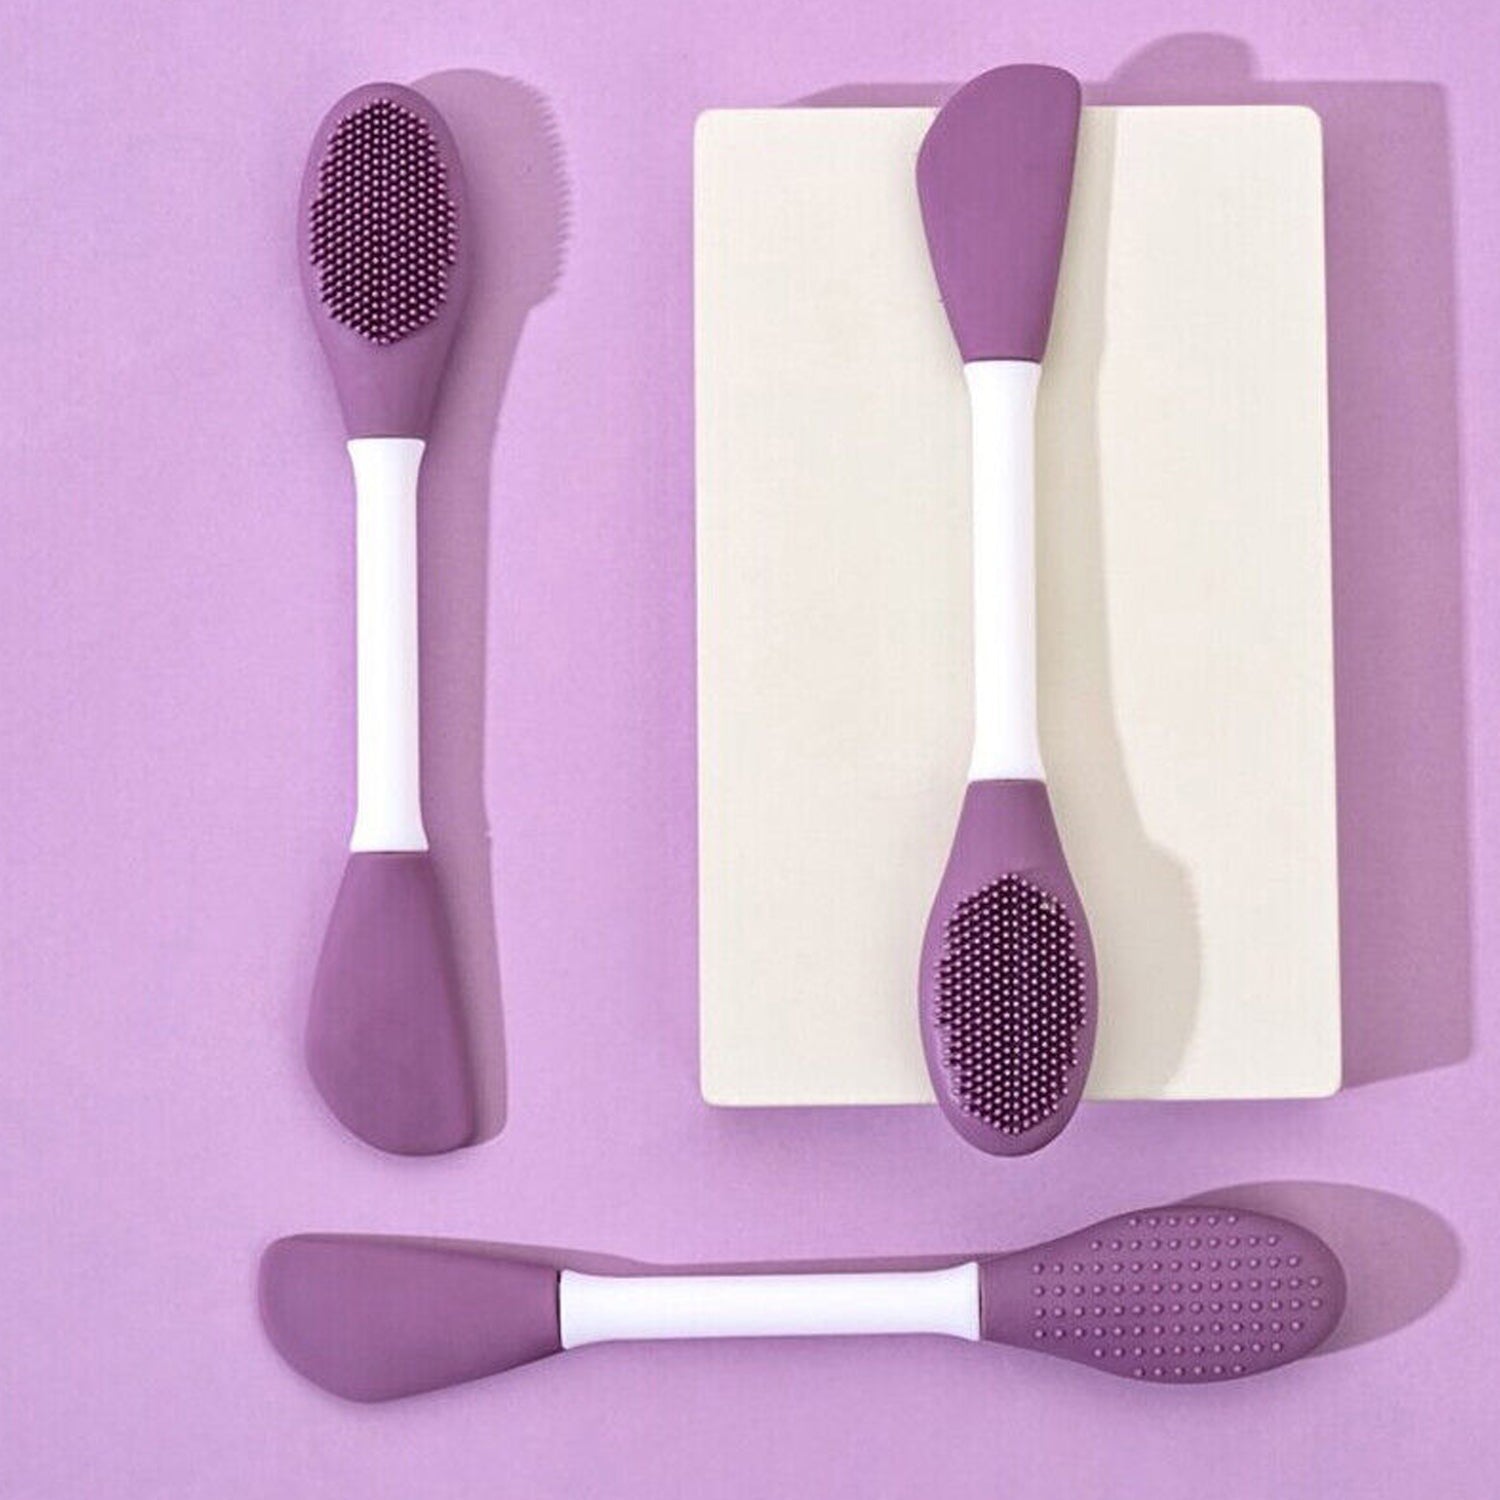 Double-headed Silicone Mask Brush Face Cleansing and Applying Mud Mask Beauty Salon Special Brush Smear Tool Facial Scrub Silicone Wash Scrubber Face Tools (1 Pc)